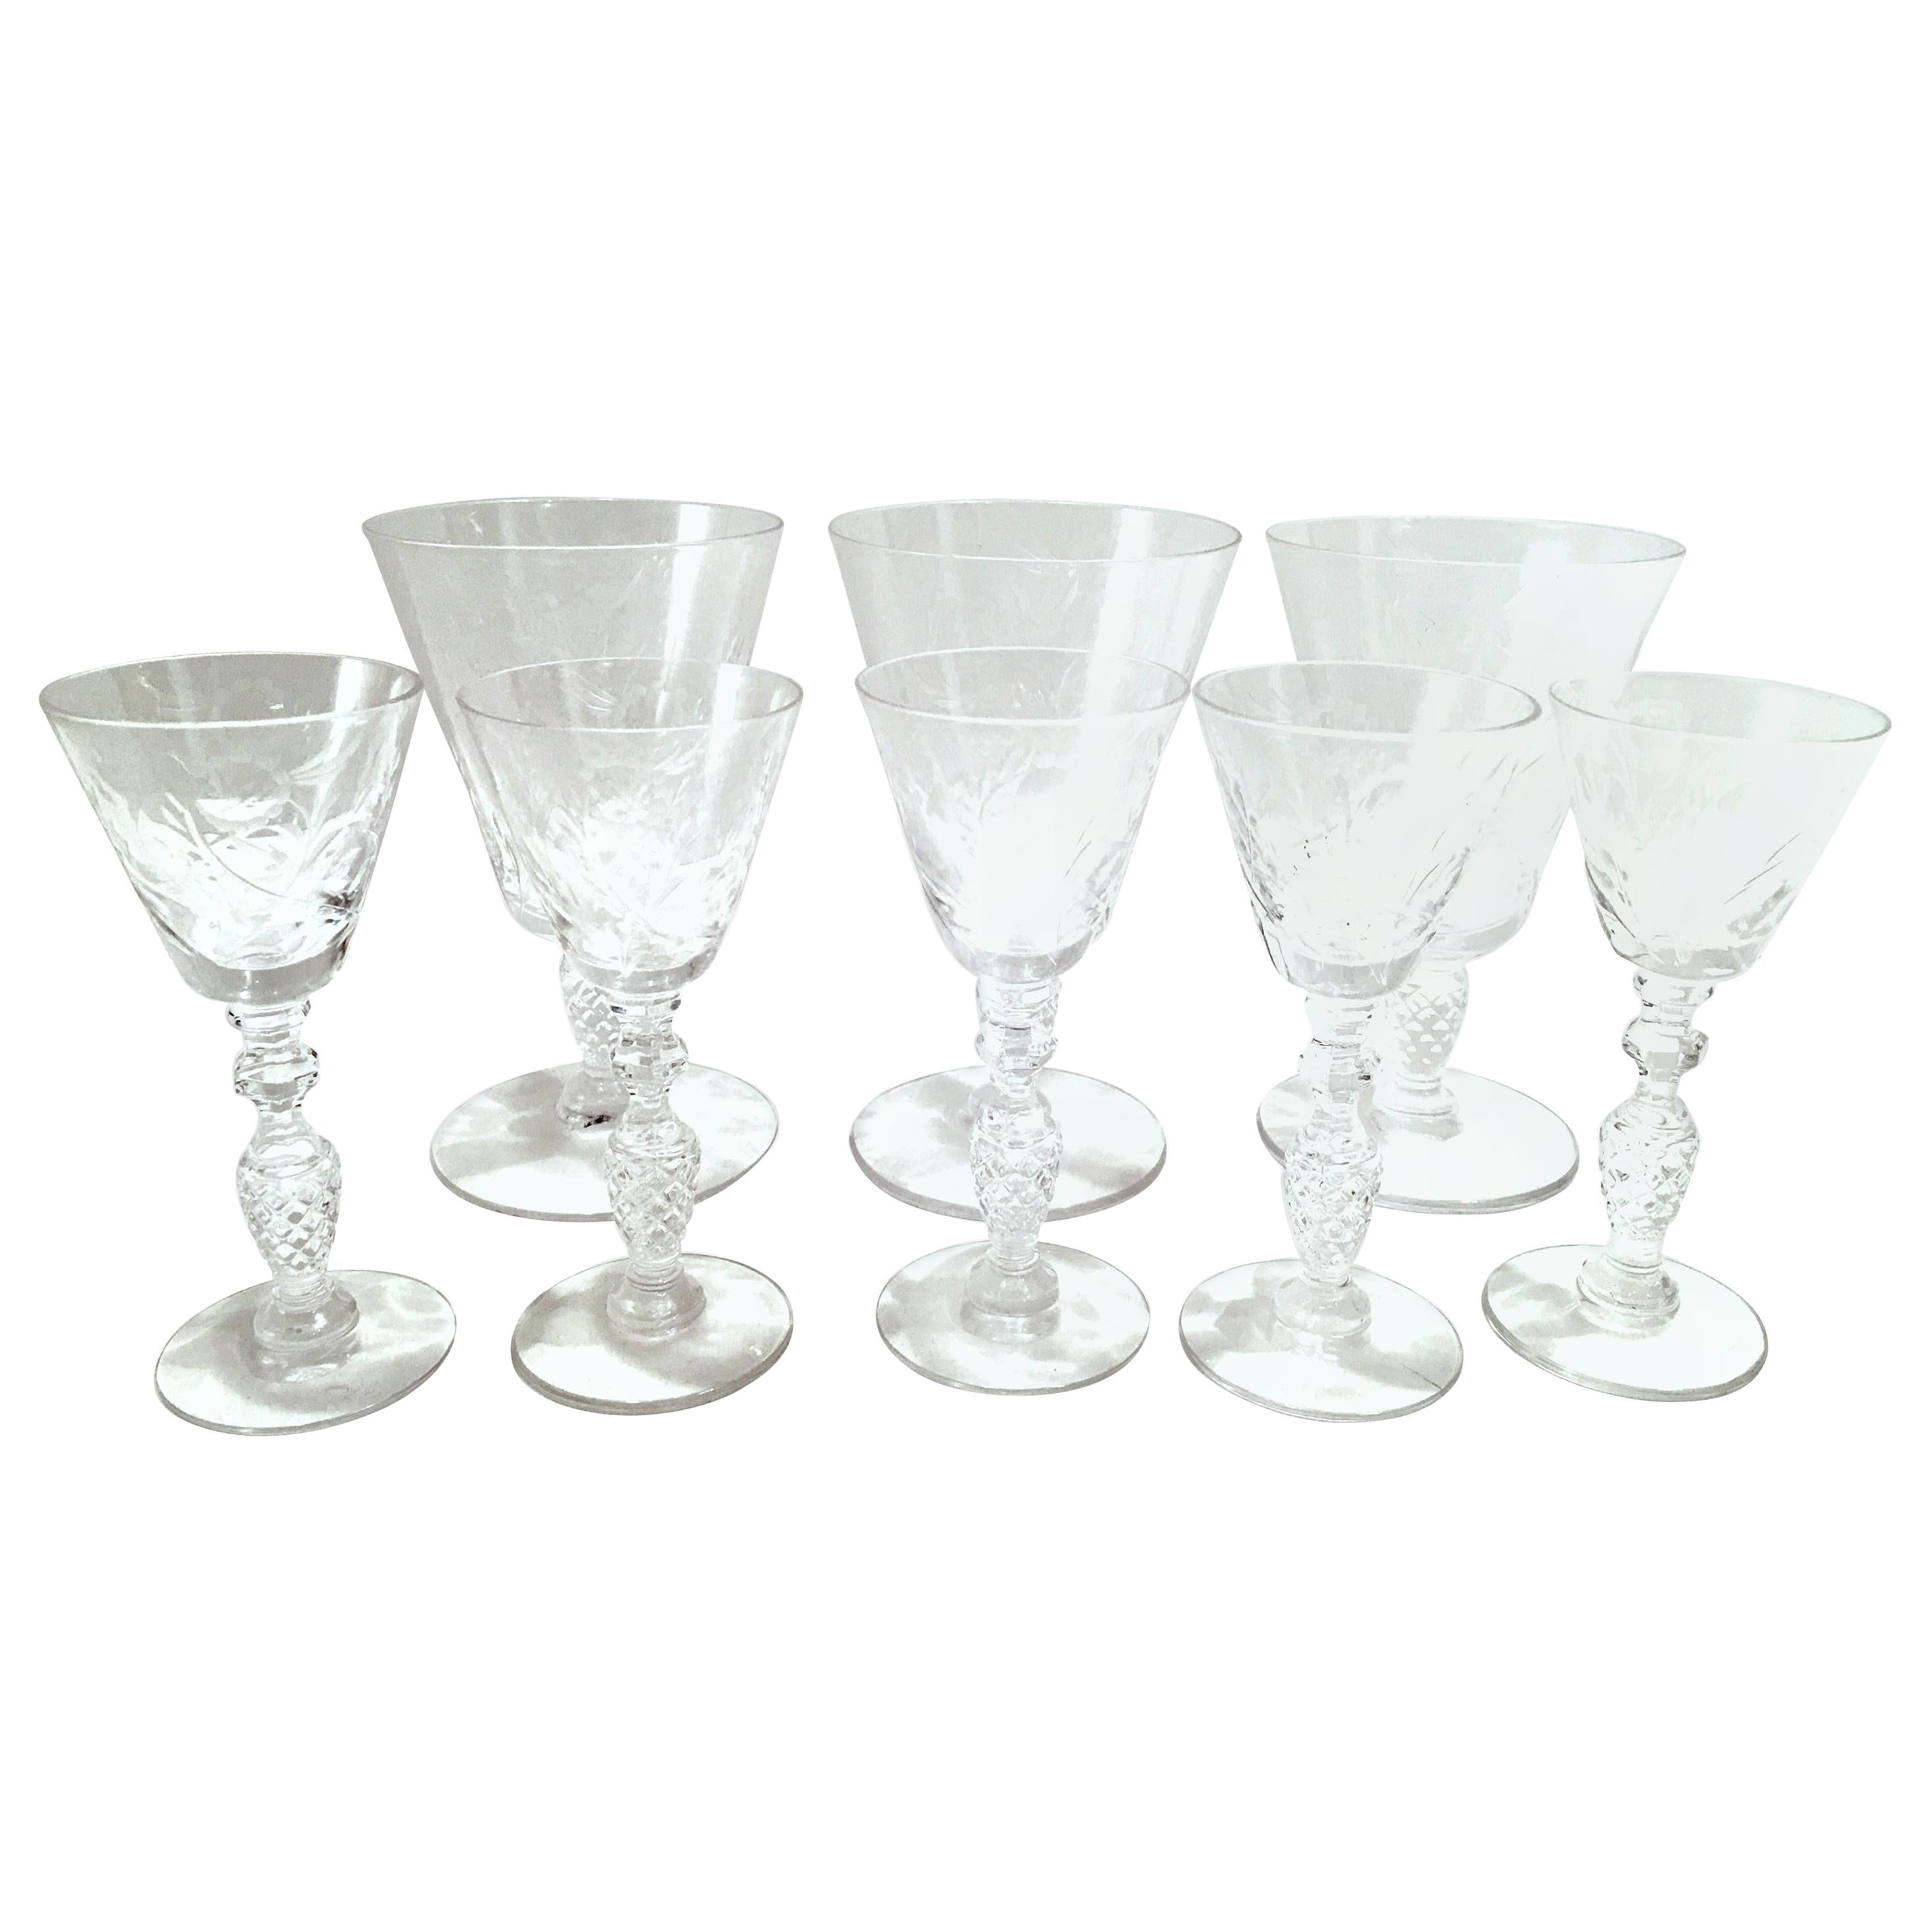 Mid-20th Century American Cut and Etched Crystal Stem Glasses, Set of 8